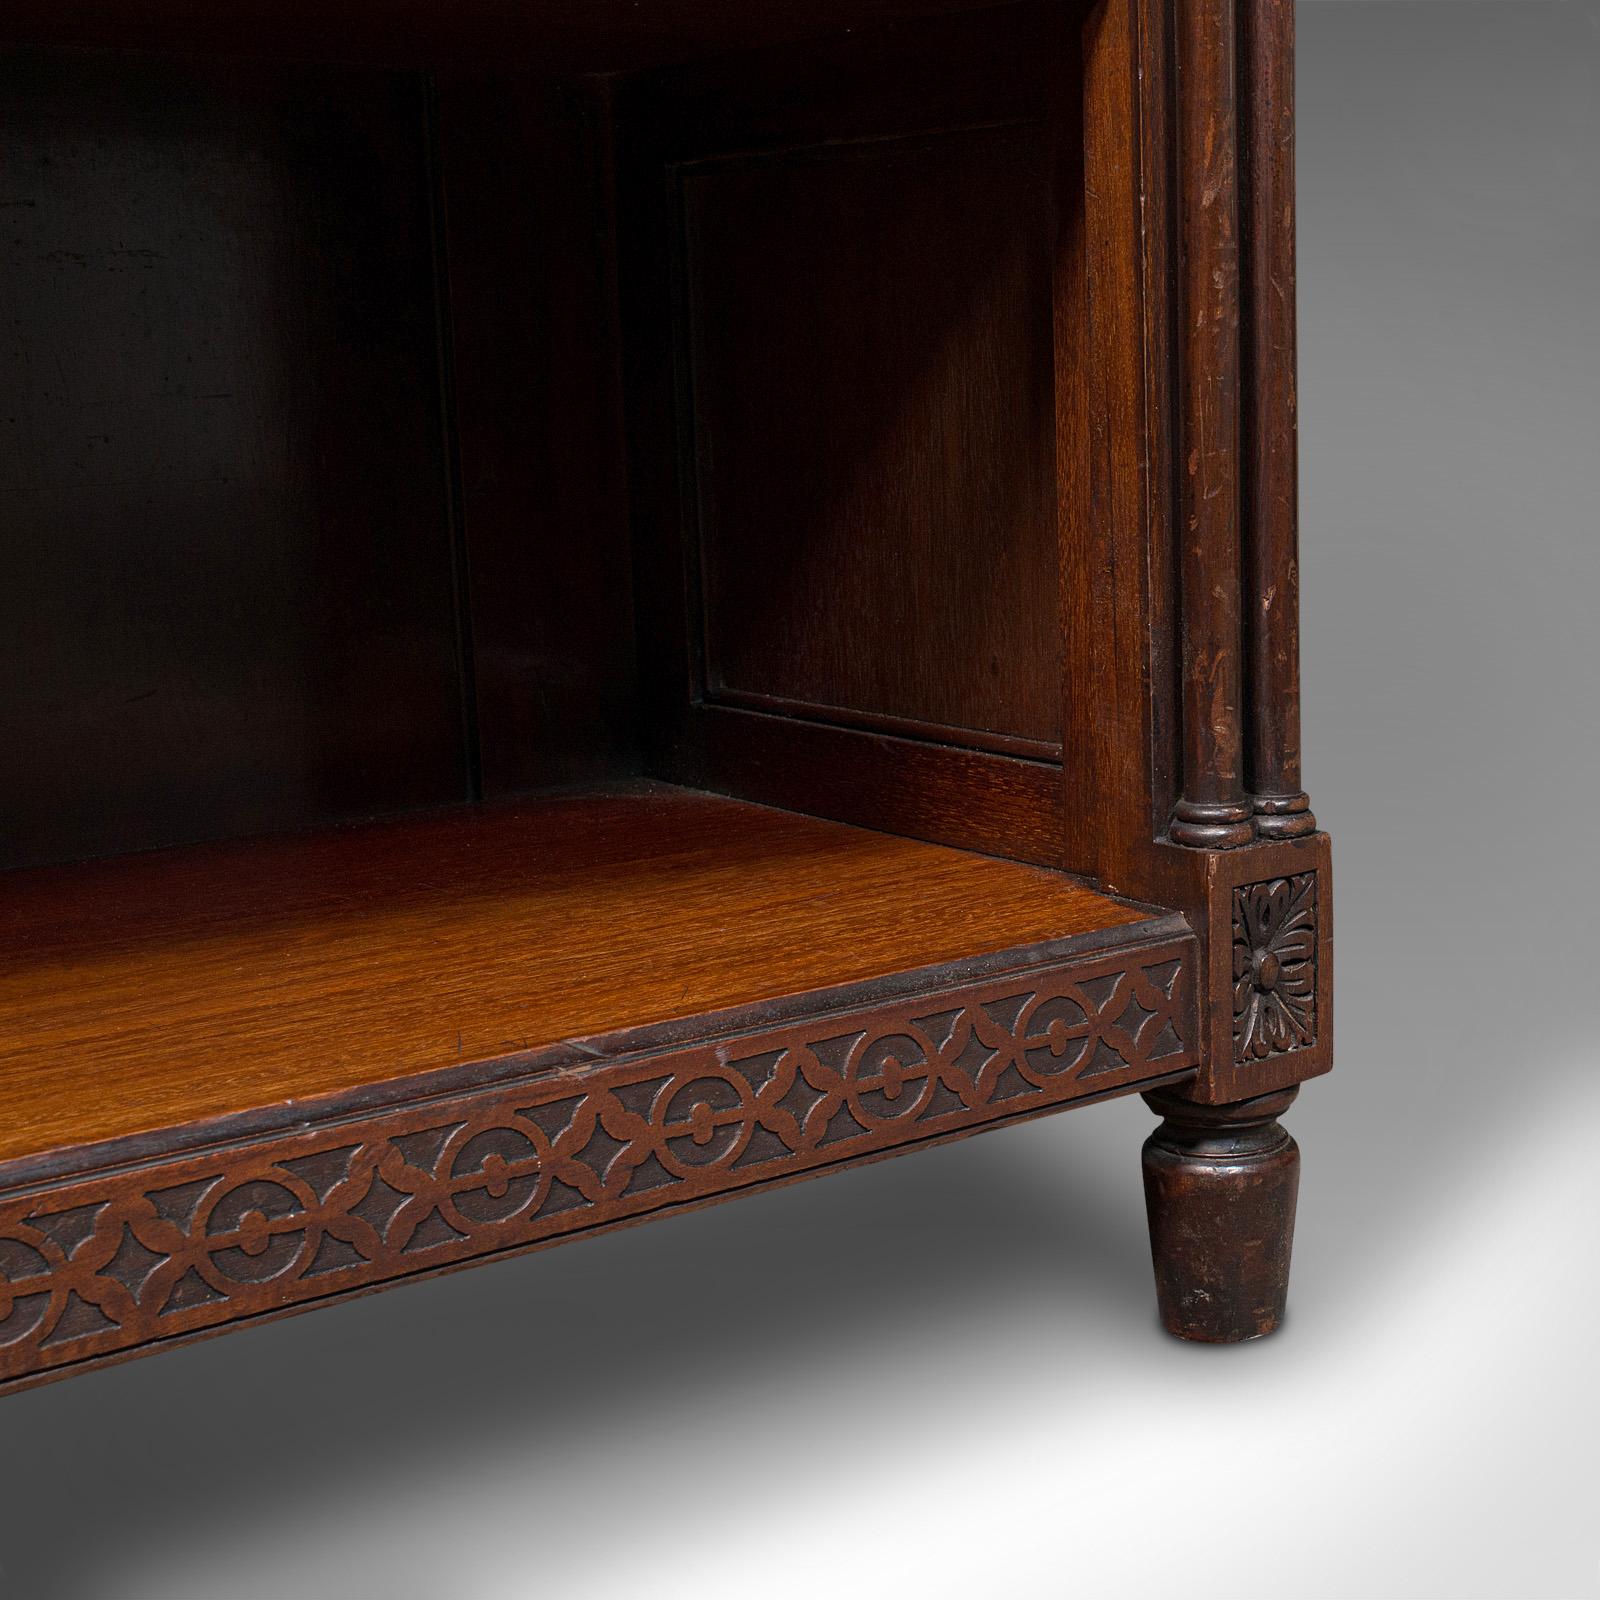 Antique Drawing Room Book Cabinet, English, Walnut, Bookshelves, Victorian, 1880 1